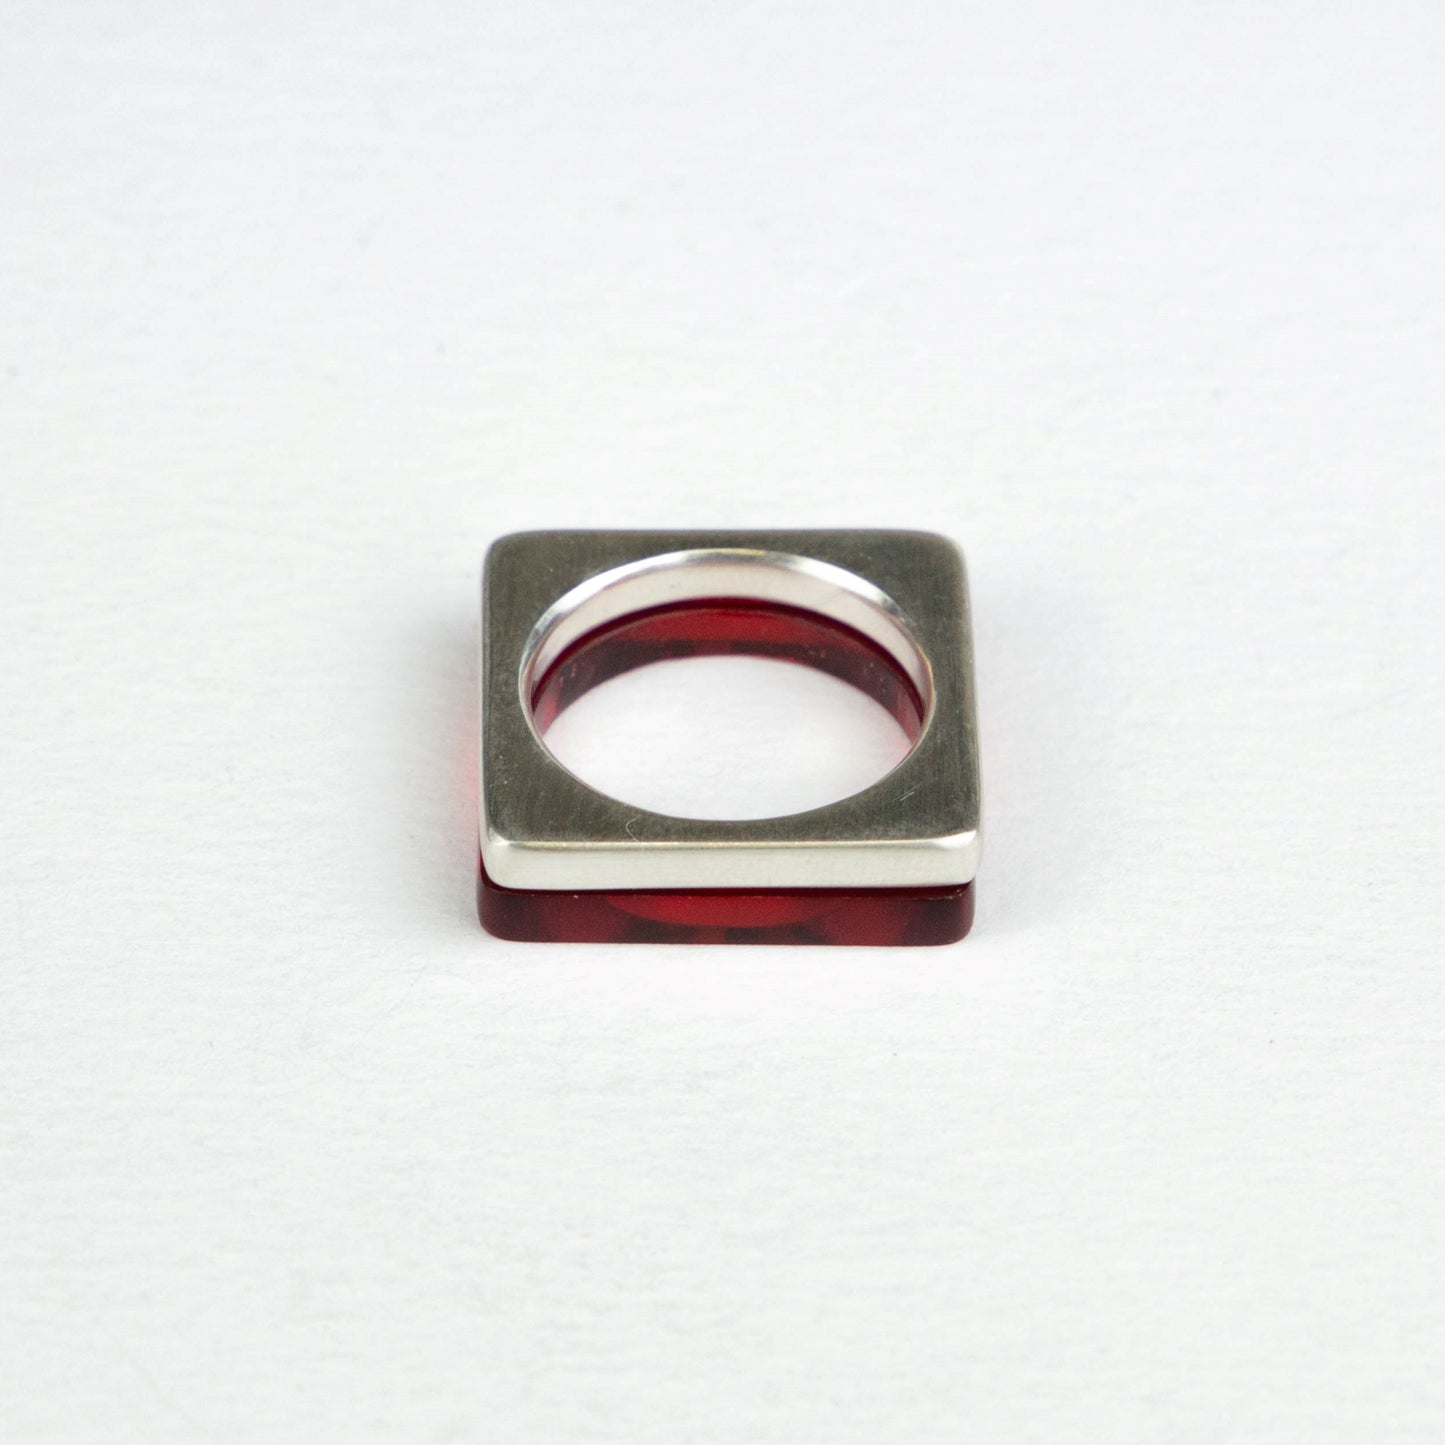 Dark red perspex ring stacked with heavy square silver ring www.barbaraspence@hotmail.co.uk